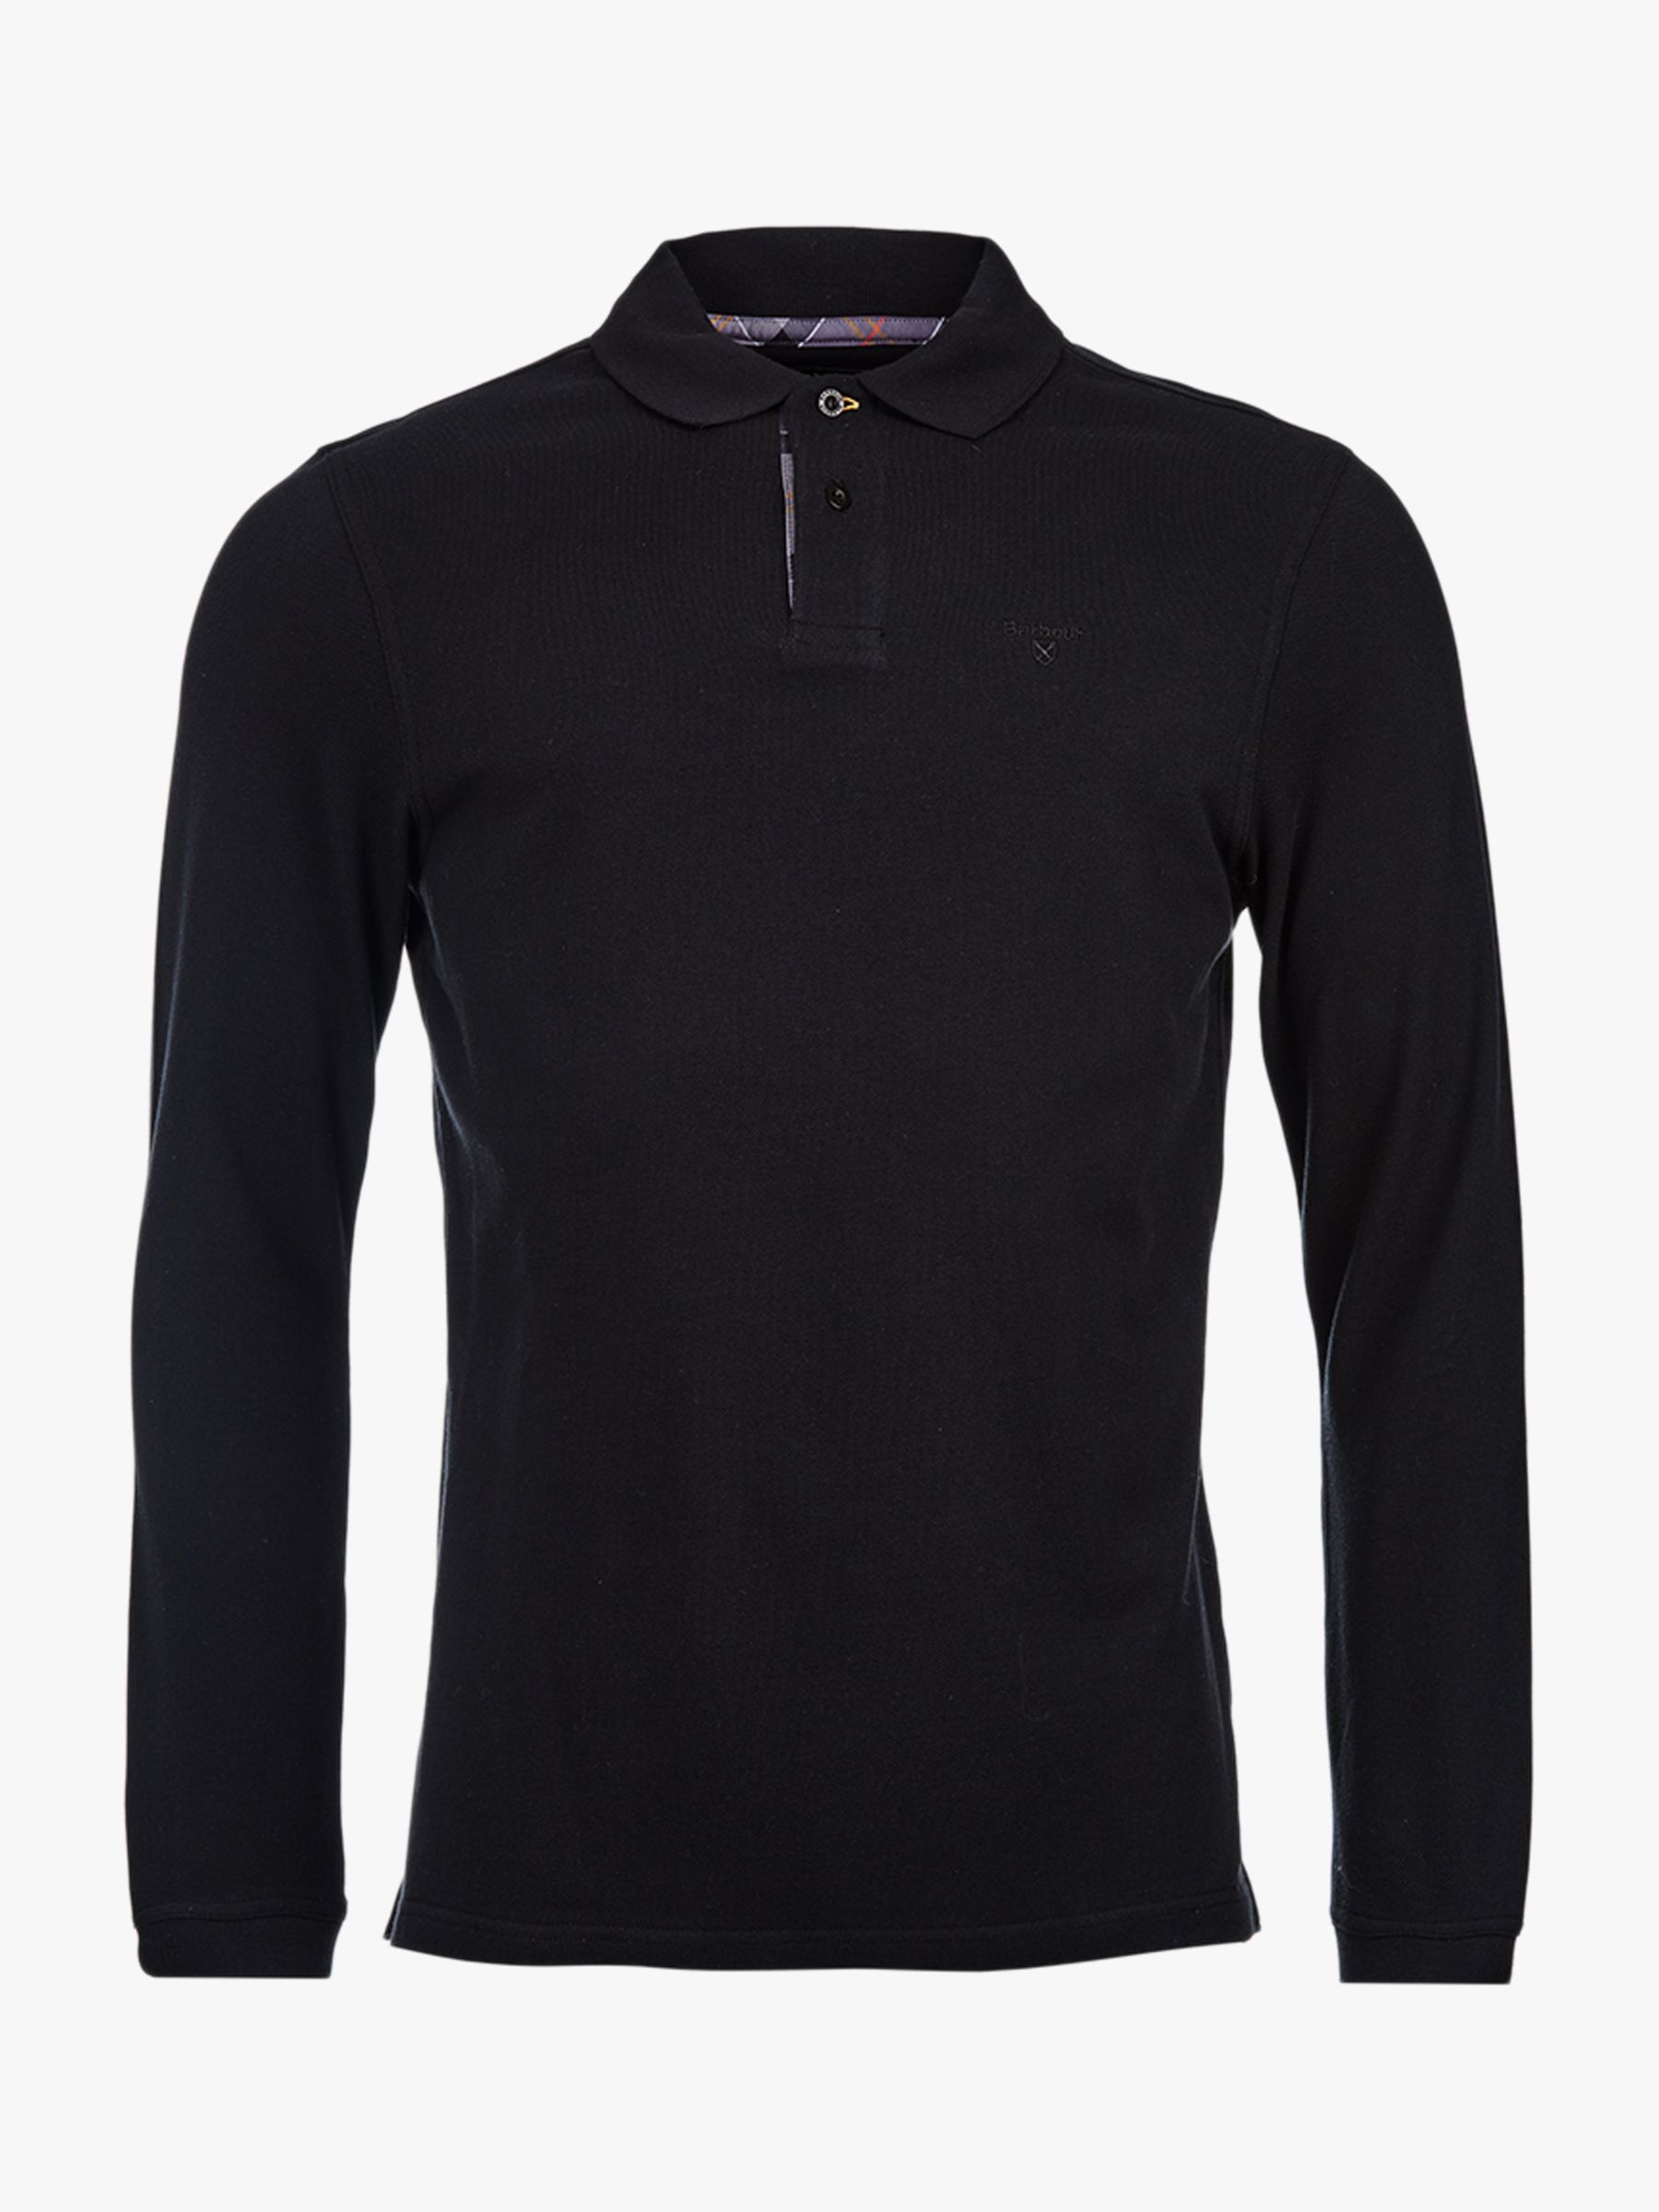 Barbour Long Sleeve Sports Polo Shirt at John Lewis & Partners